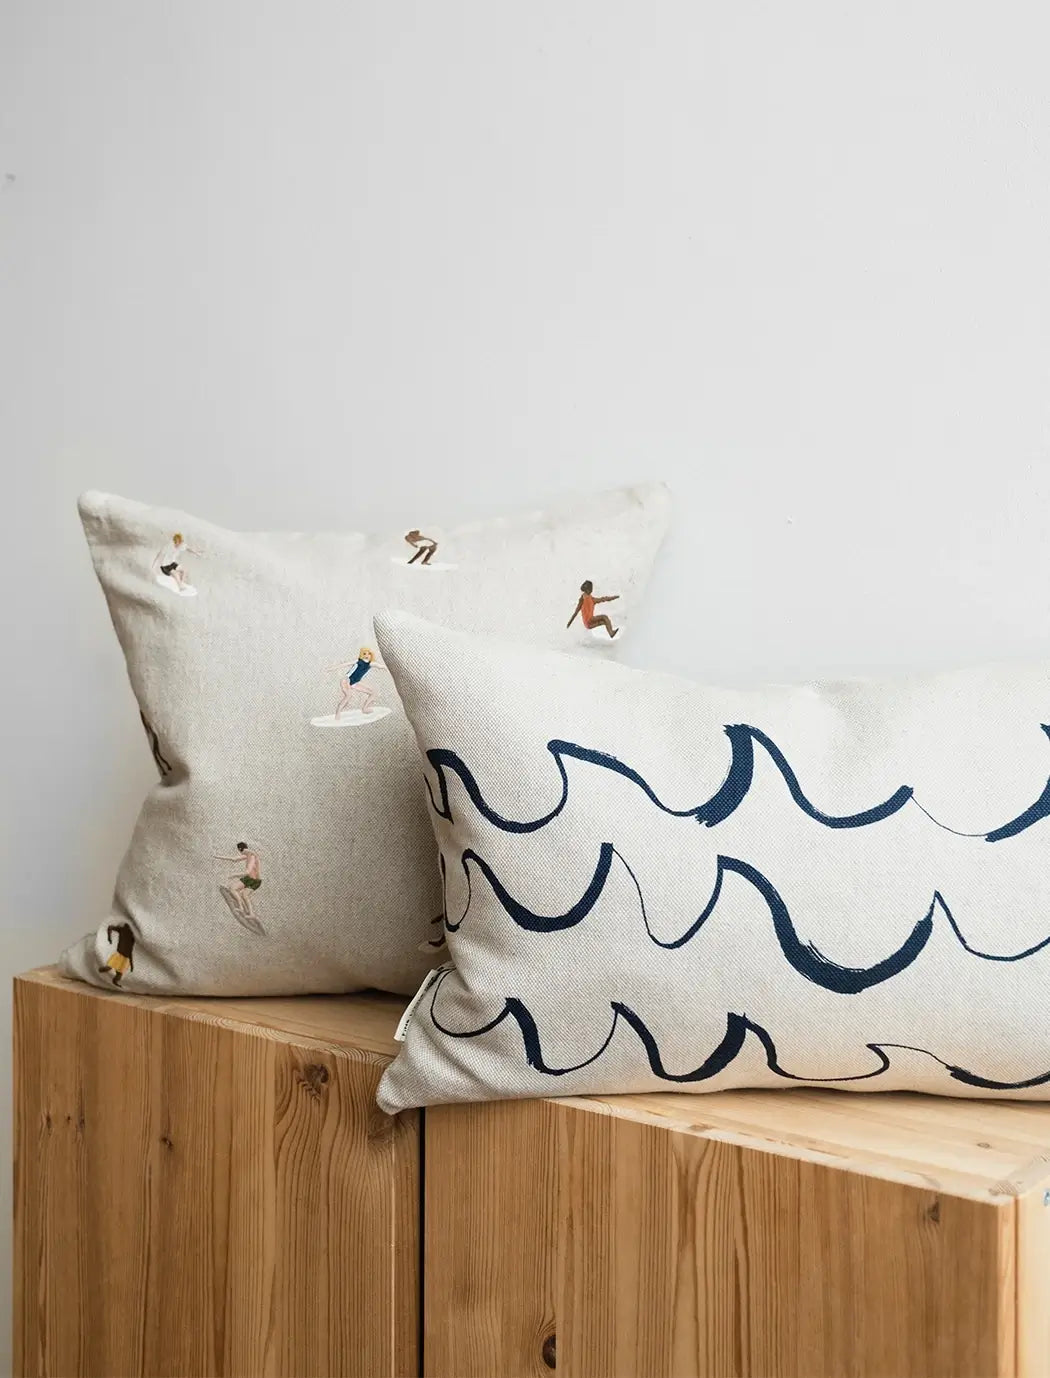 A long cushion in natural linen with a minimal blue wave shaped brush stroke motif from Fine Little Day. It sits next to a square cushion with embroidered surfers on it.